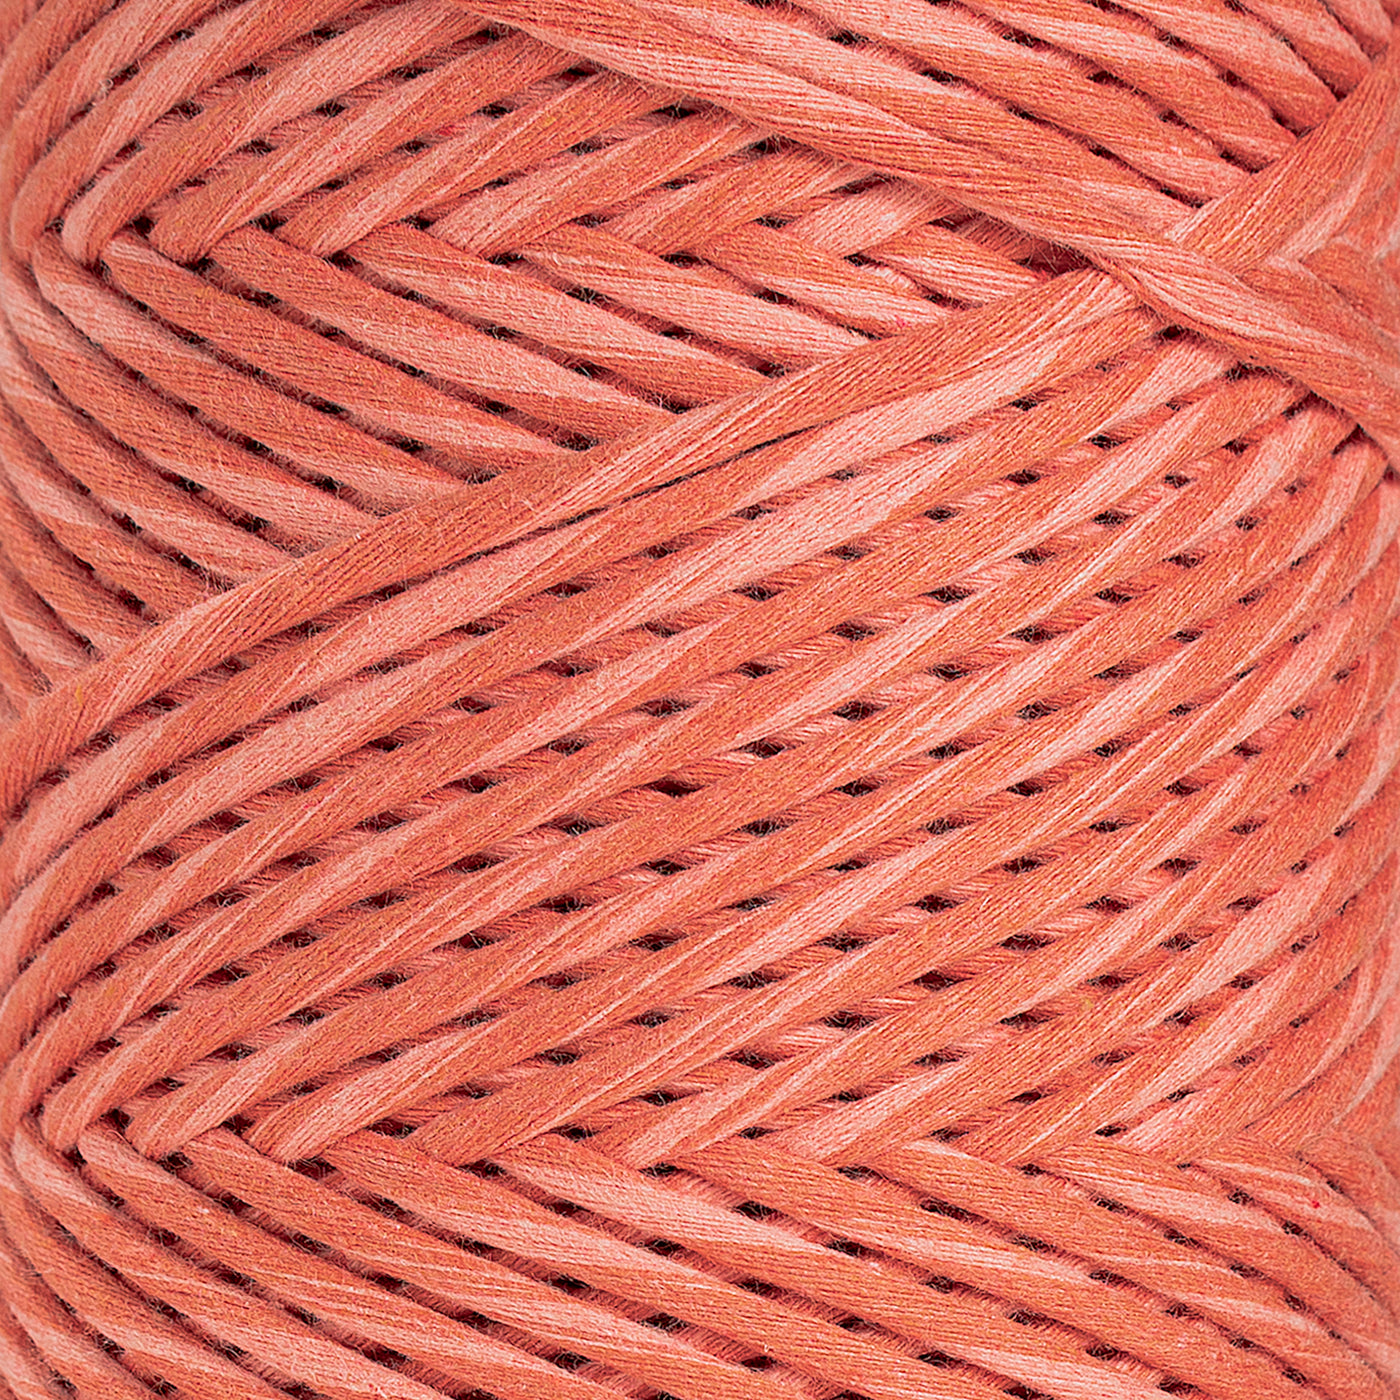 DUAL RECYCLED COTTON MACRAME CORD 4 MM - SINGLE STRAND - SUNSET + FRUIT PUNCH COLOR